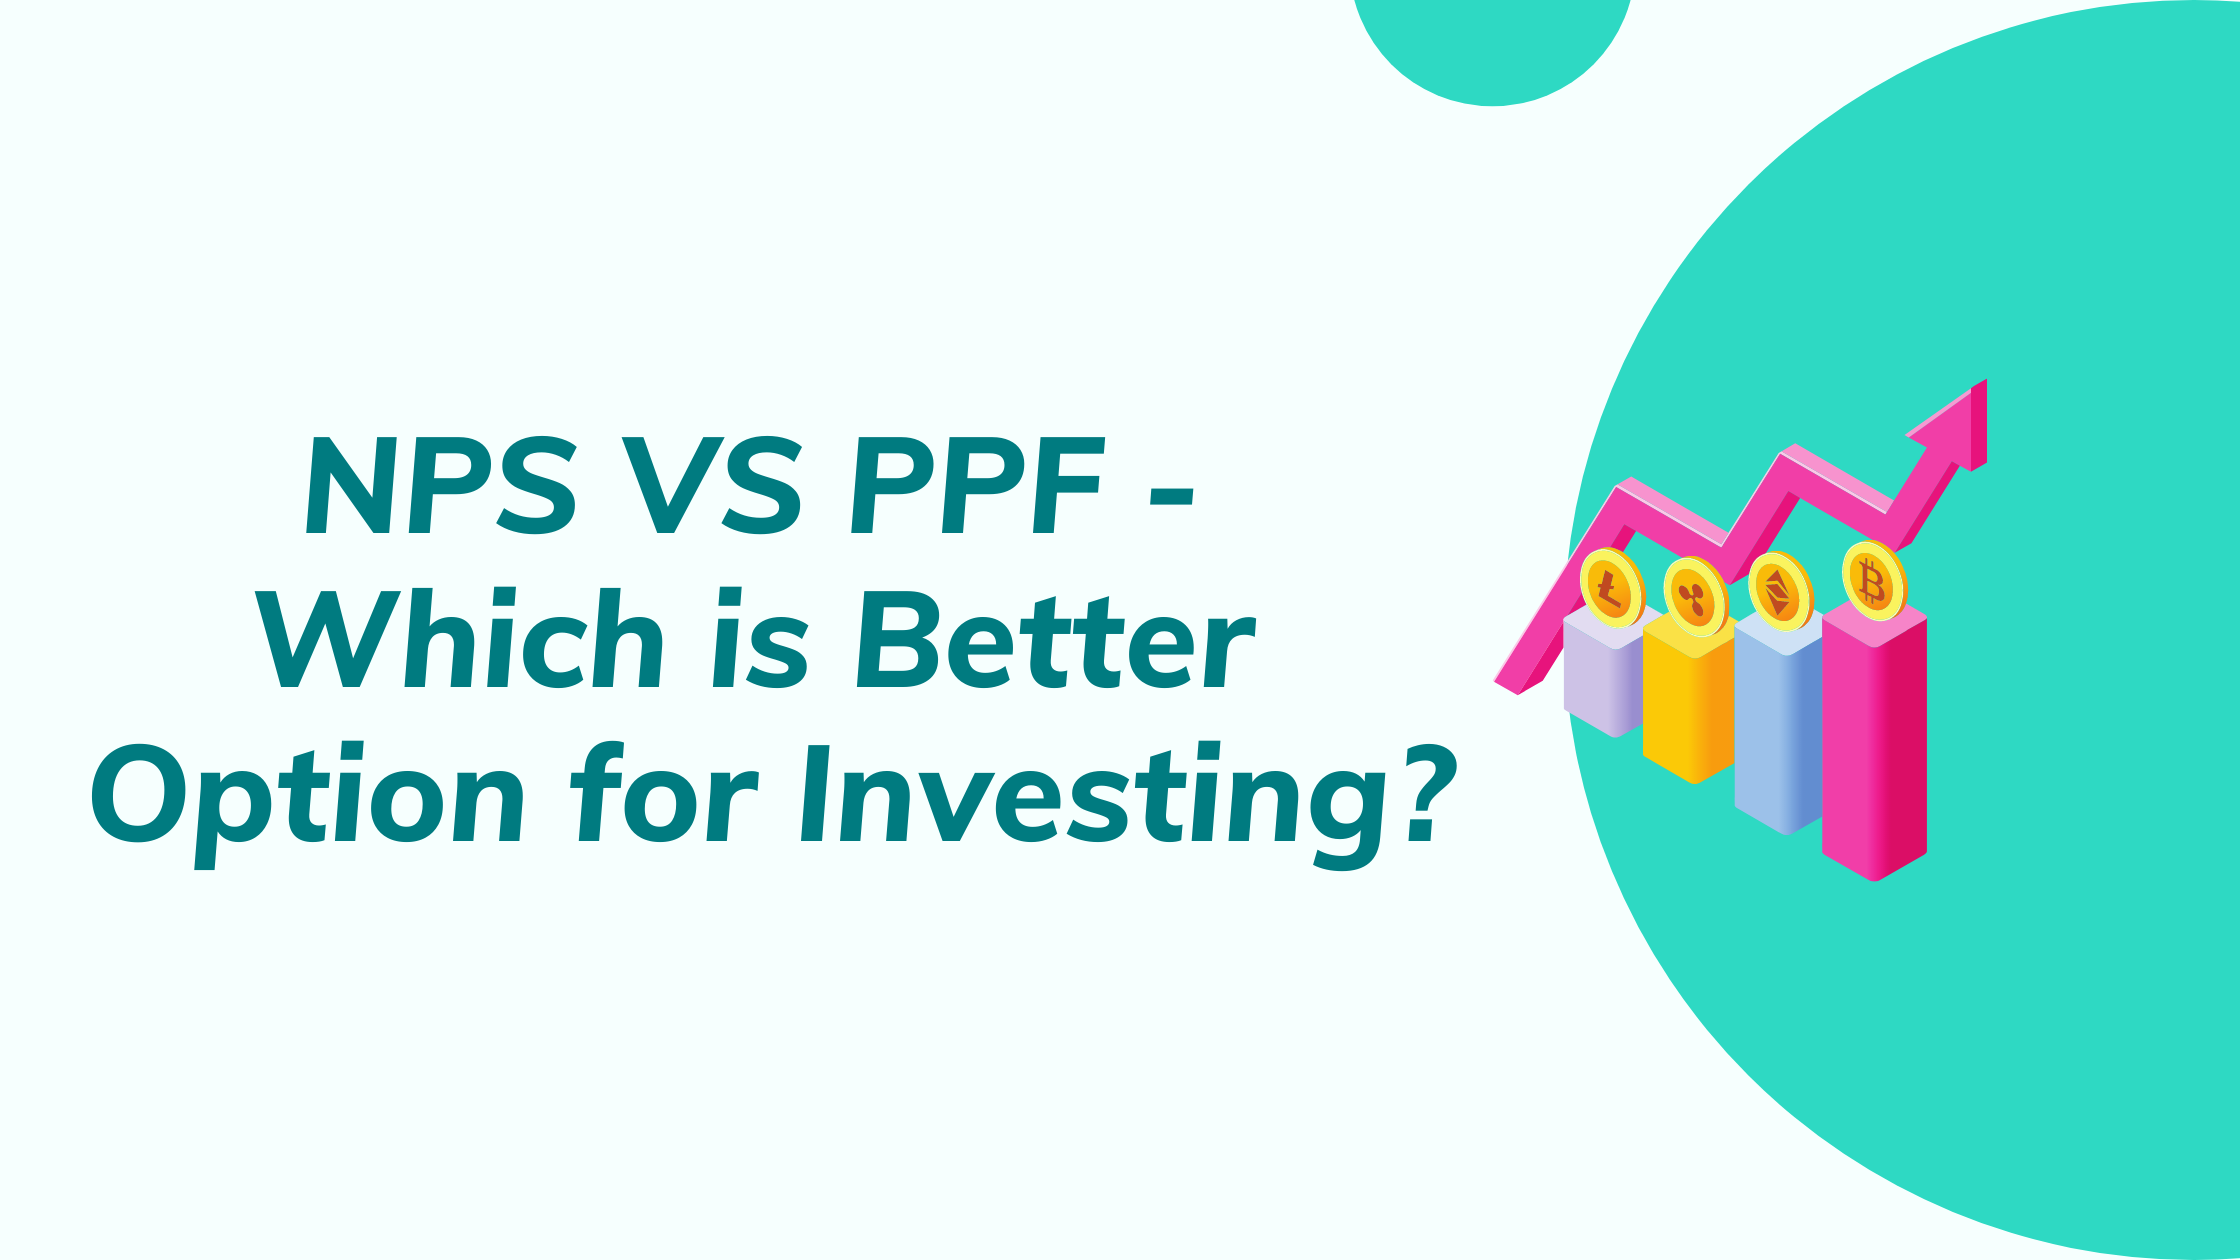 NPS VS PPF - Which is Better Option for Investing?